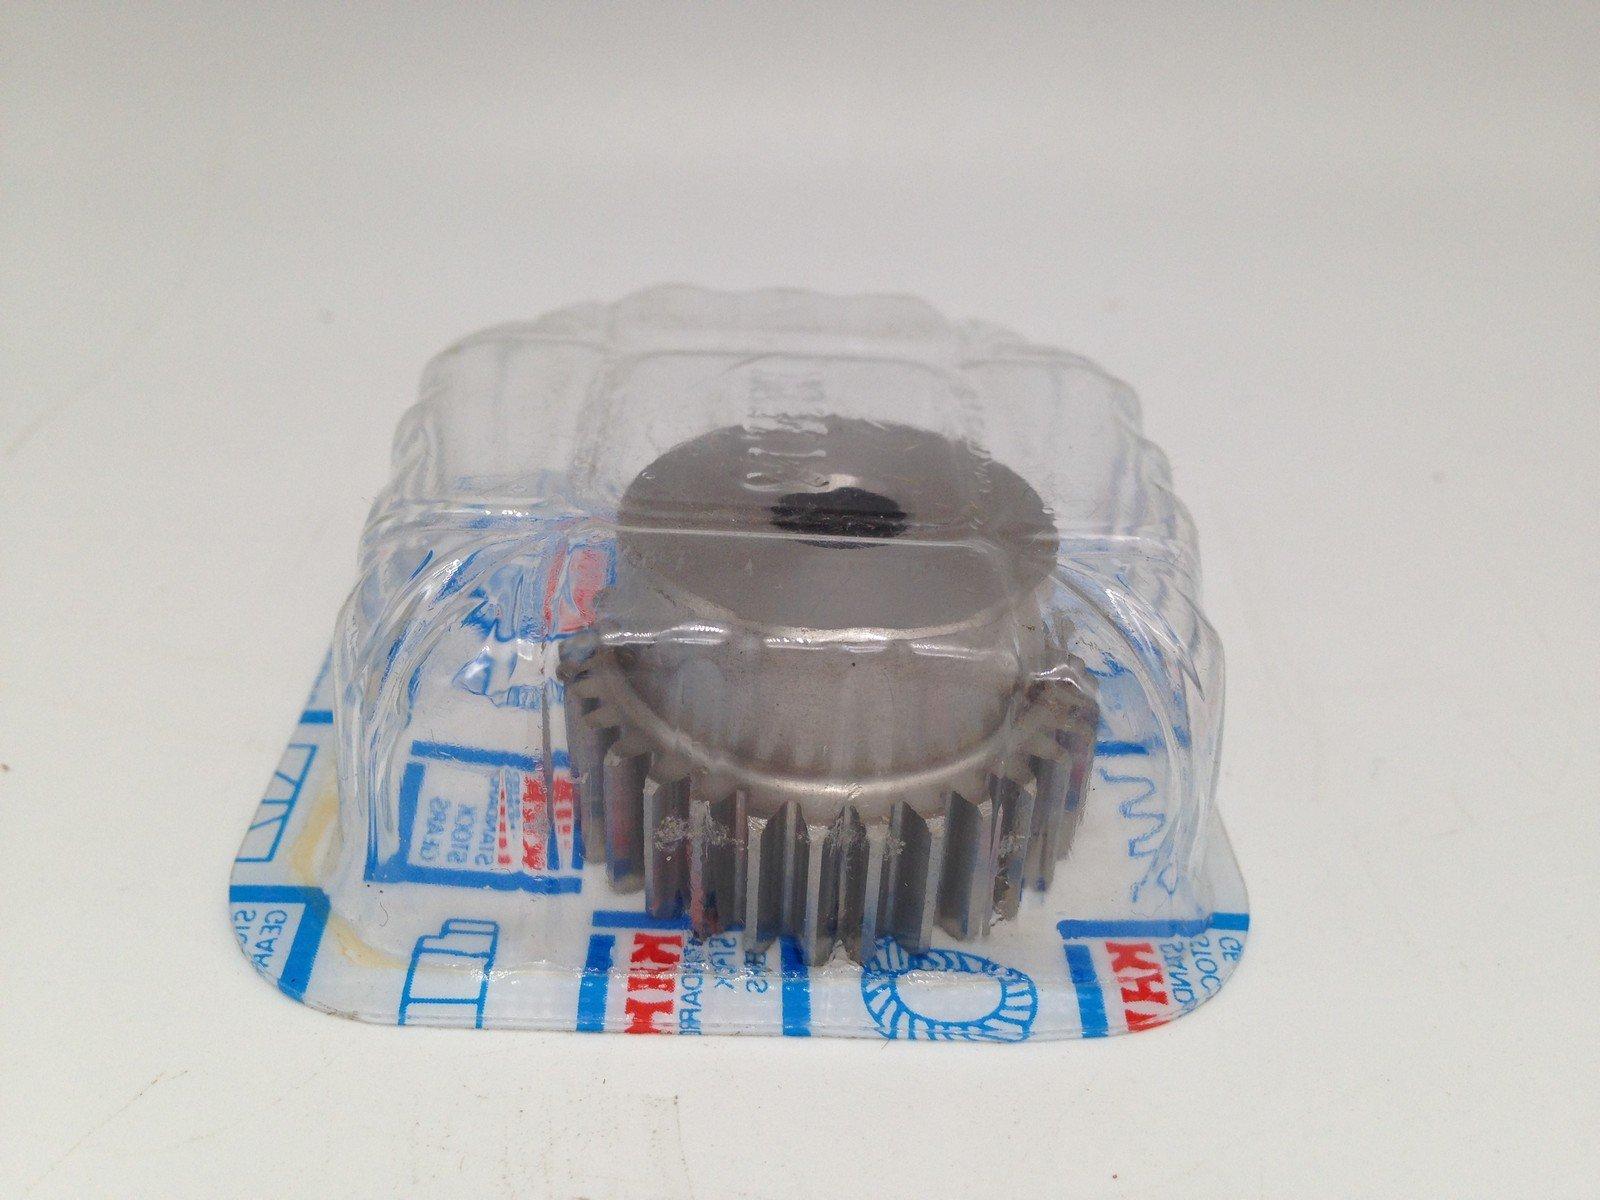 NEW KHK SUS1-32 Spur Gear, Module 1, 32-Tooth, 8mm Bore 